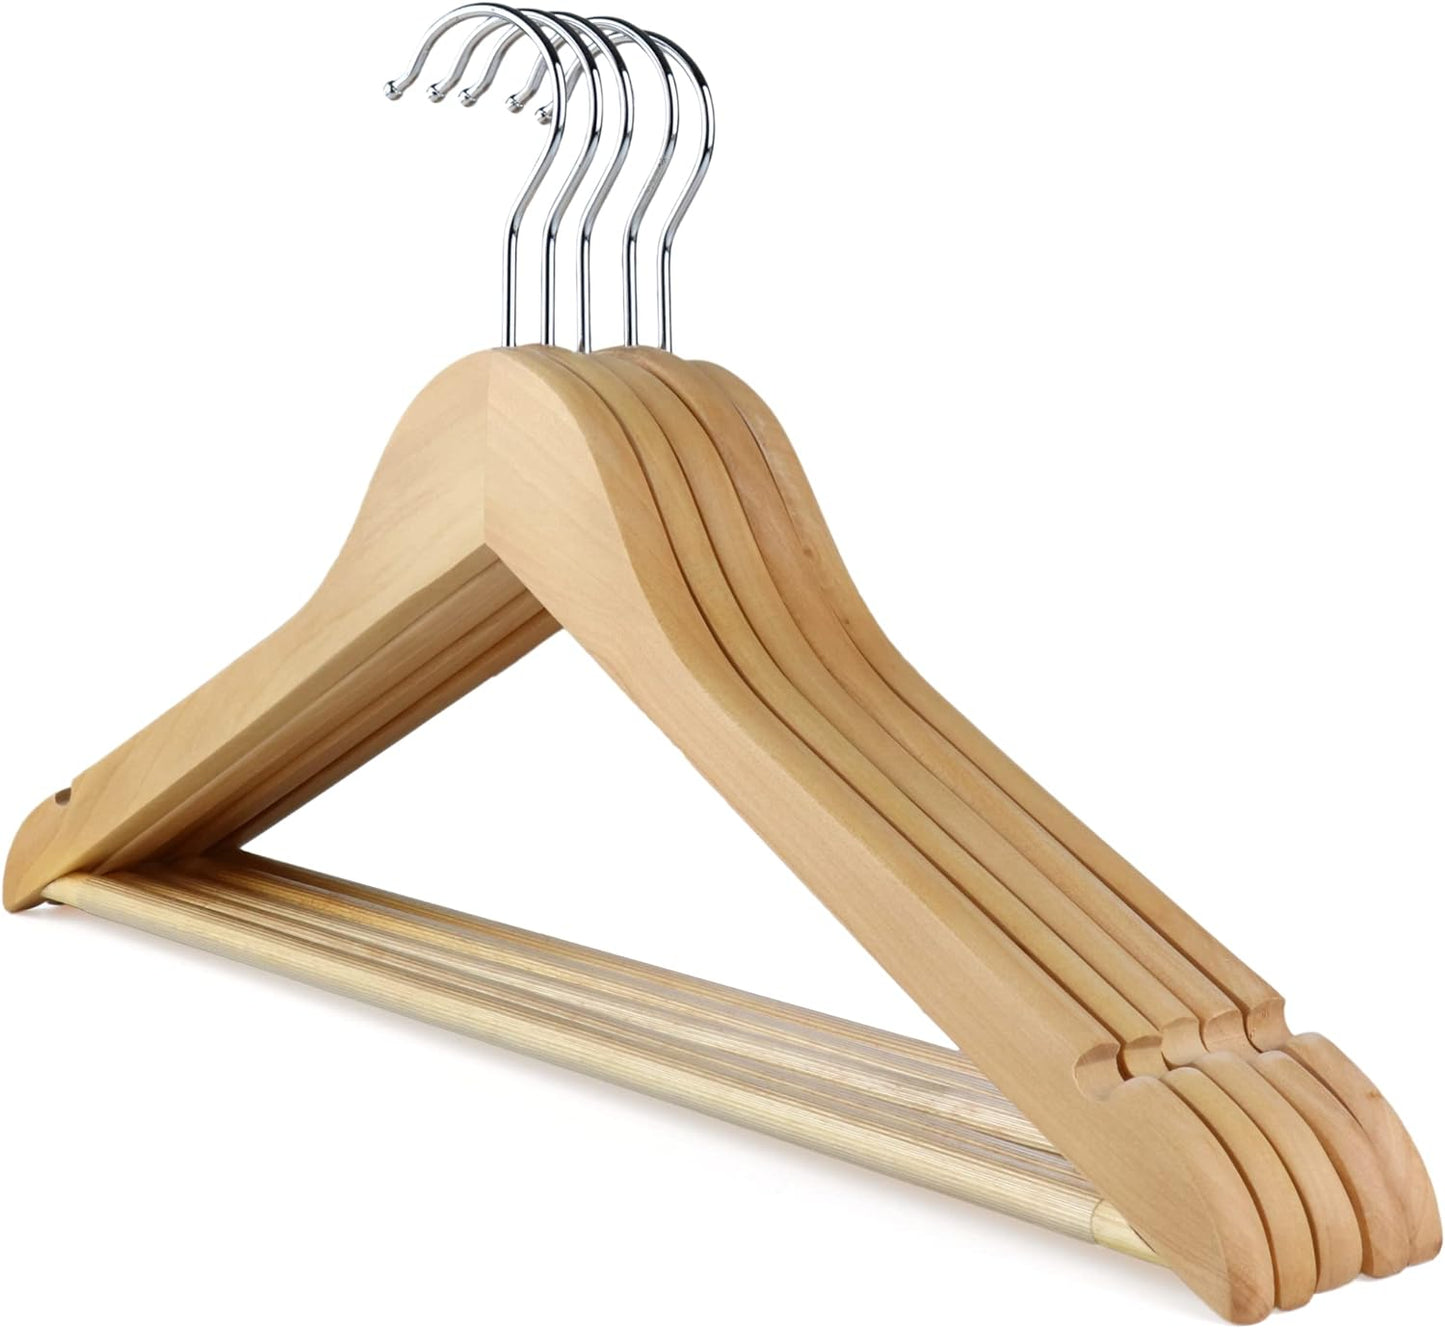 5 Natural Wooden Coat Hangers With Trouser Bar